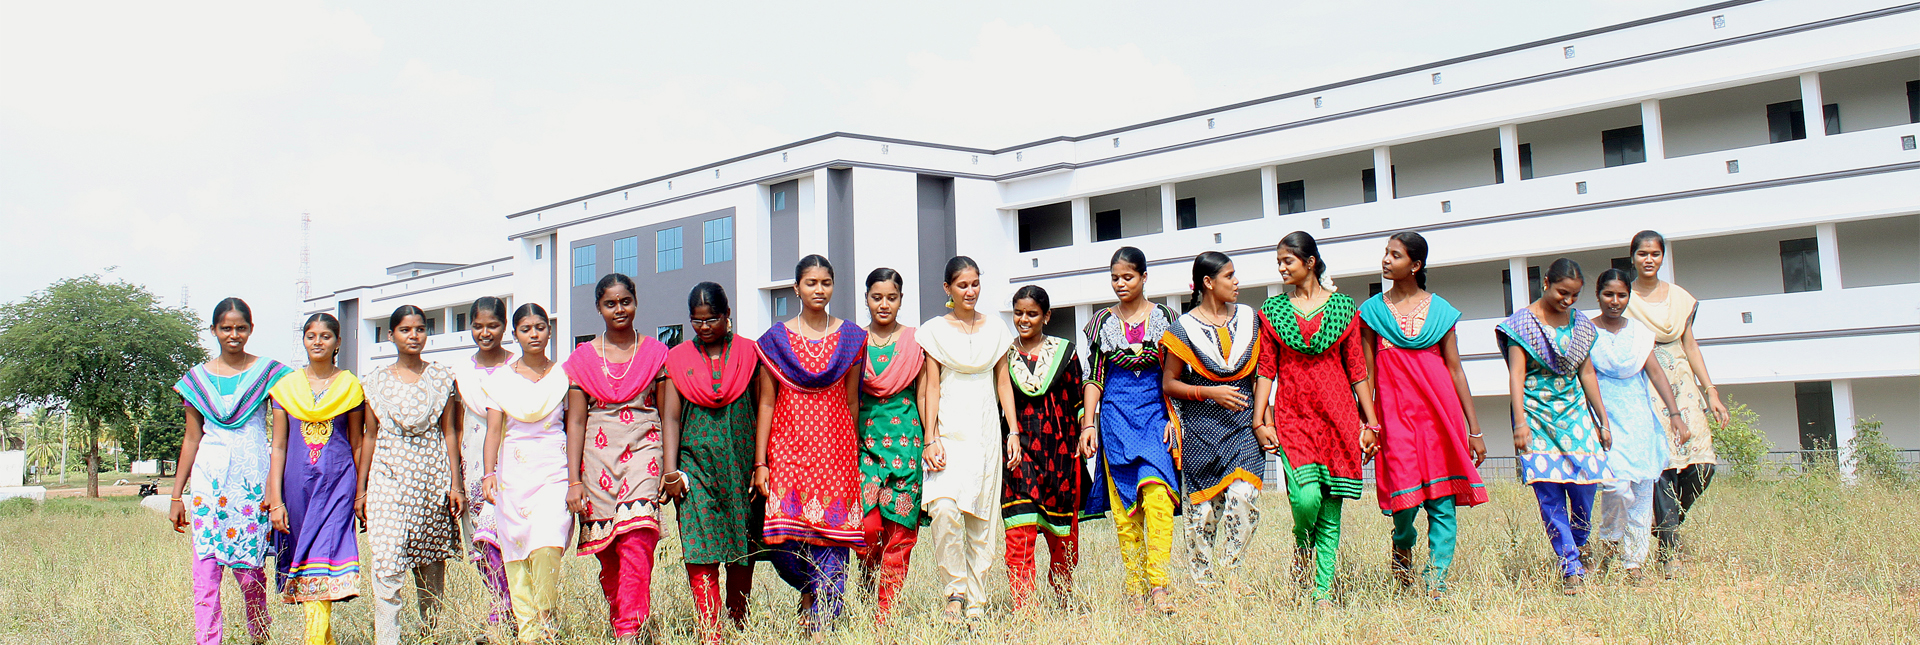 Gandhi College of Arts and Science for Women, Namakkal